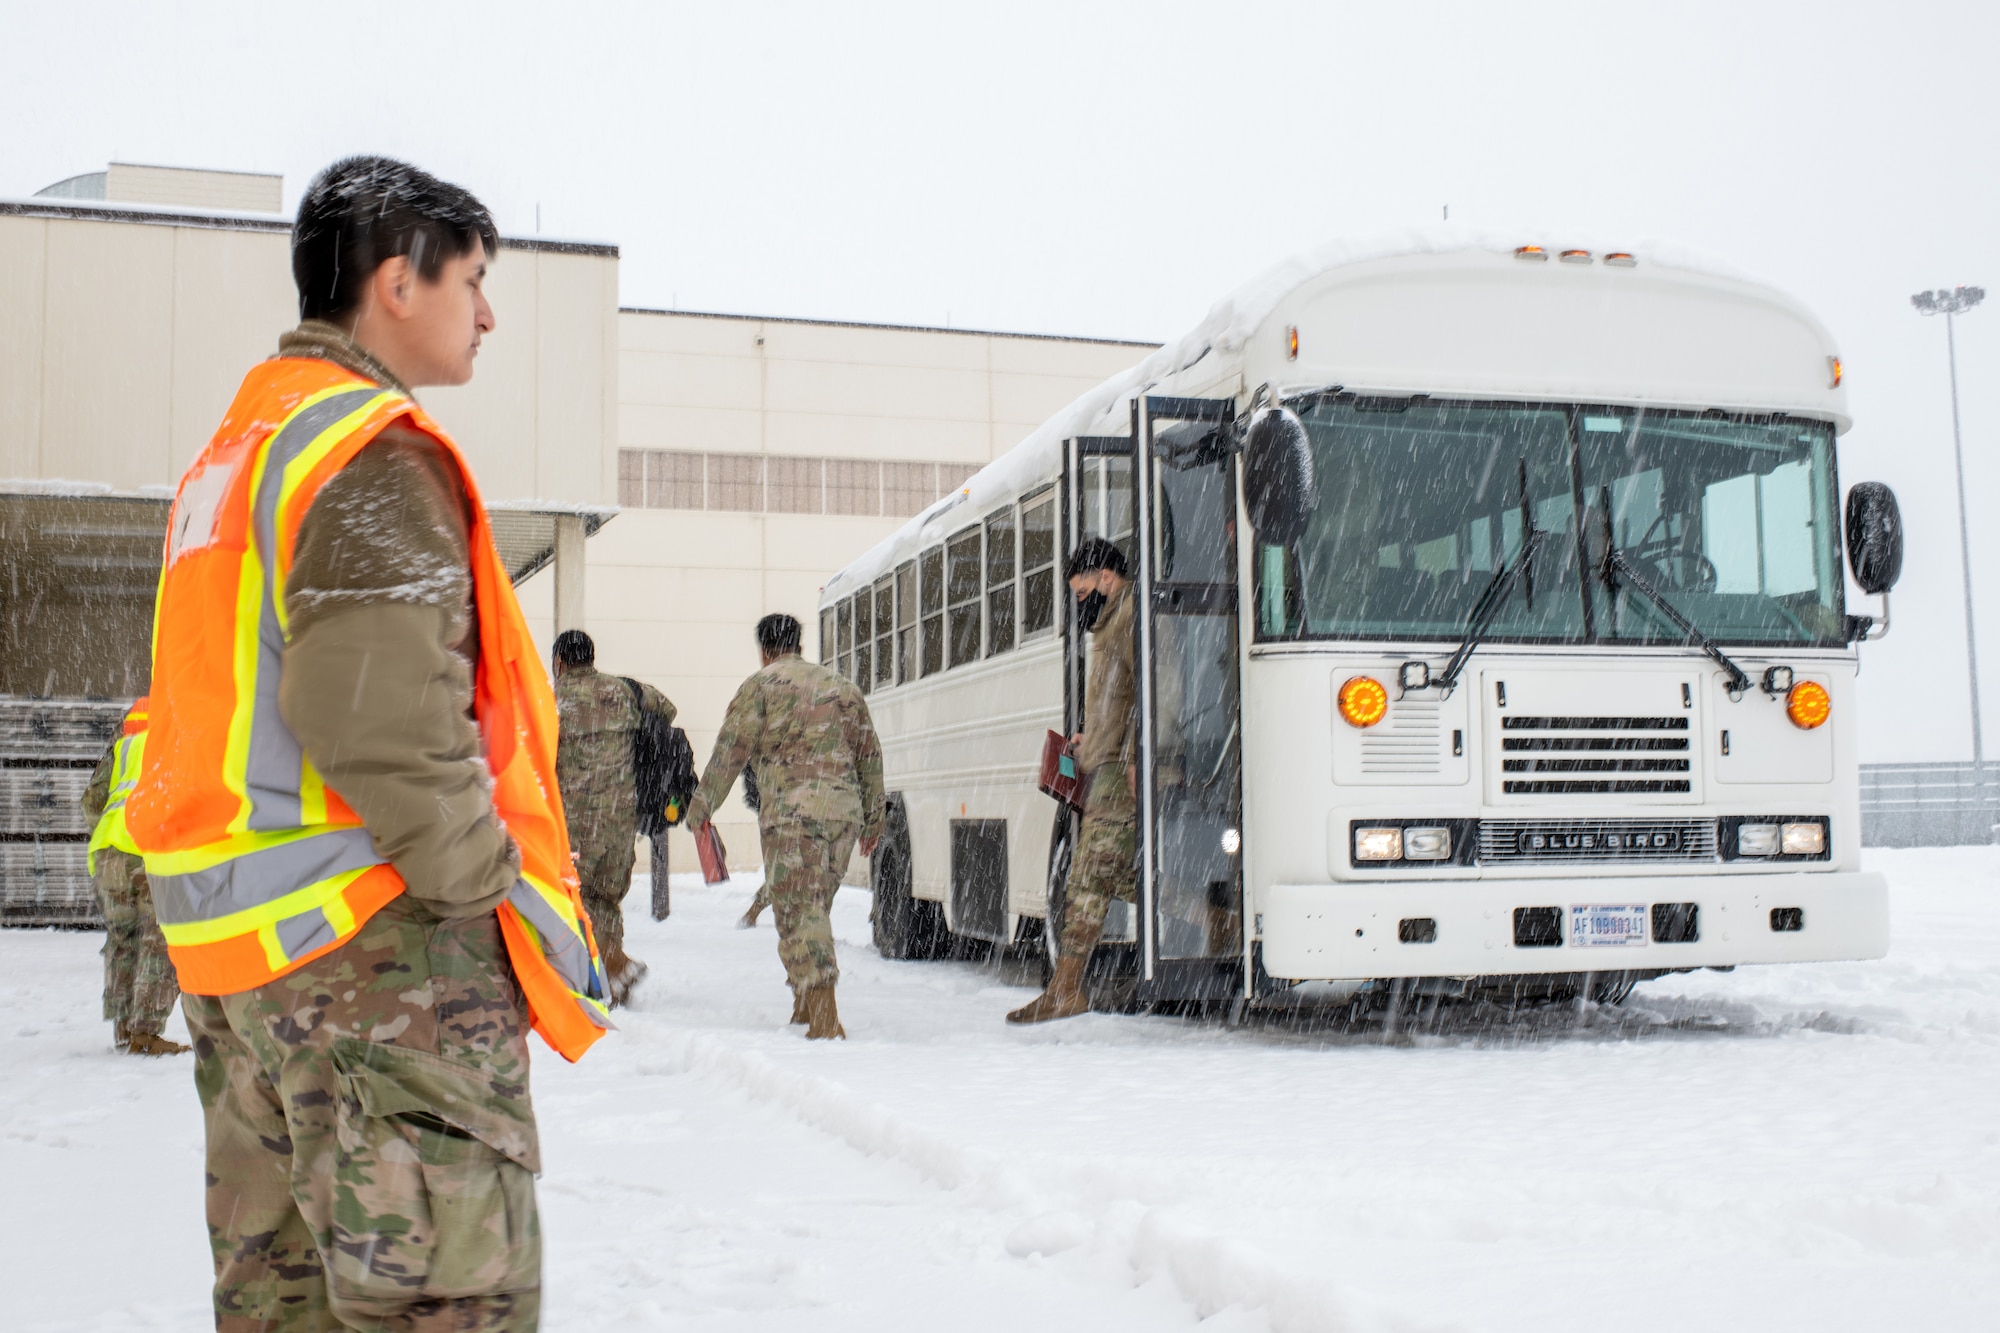 U.S. Air Force Senior Airman Rudy Johnson, assigned to the command element of 773d Logistics Readiness Squadron, watches Airmen disembark from a bus at the Joint Mobility Complex on Joint Base Elmendorf-Richardson, Alaska, Nov. 6, 2023.